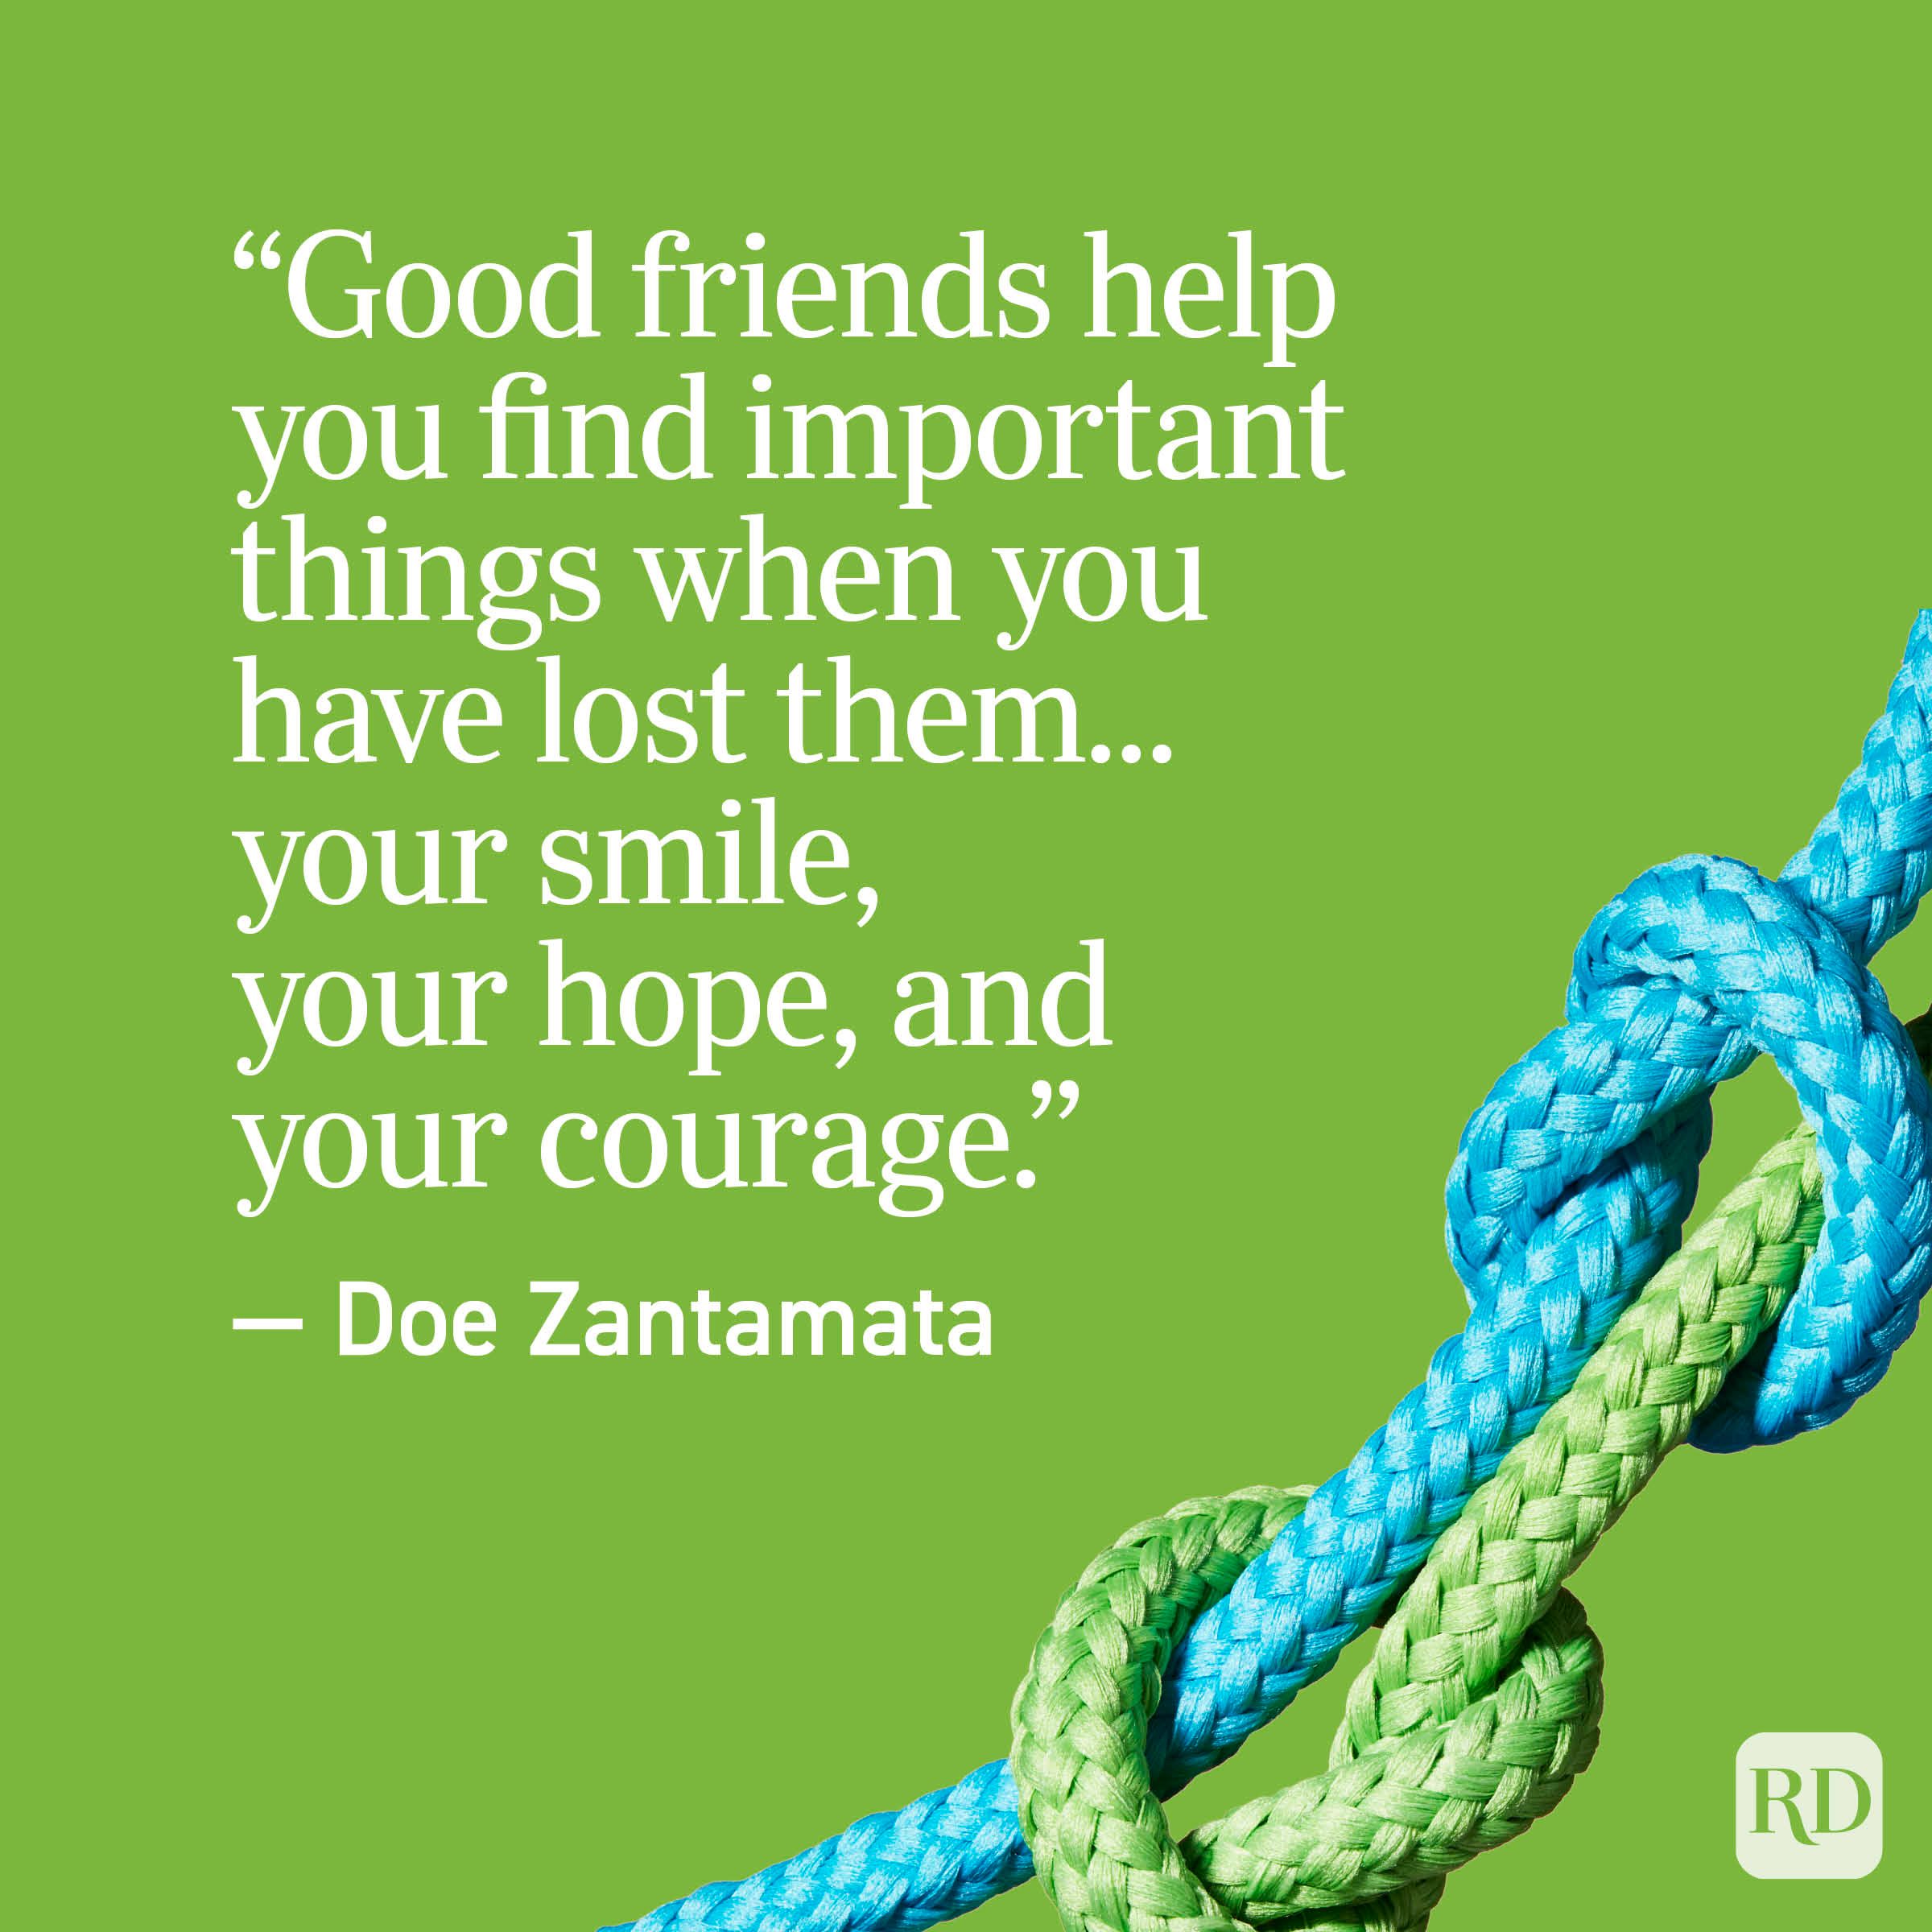 "Good friends help you find important things when you have lost them... your smile, your hope, and your courage." - Doe Zantamata